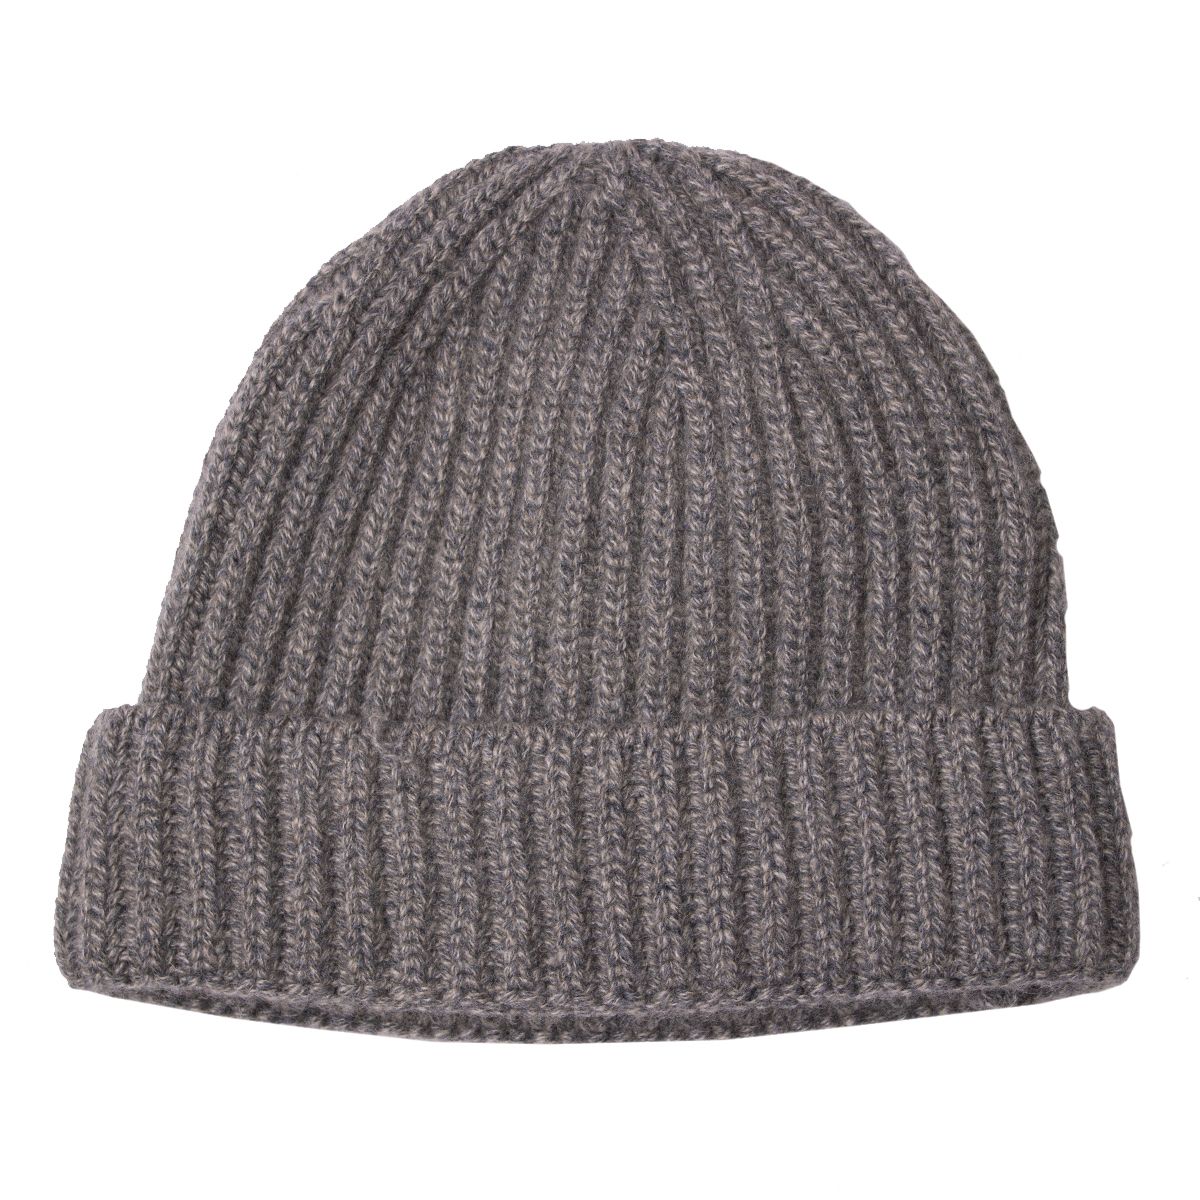 Fisherman Knit 8ply Cashmere Hat - Stoneage Derby  Robert Old   